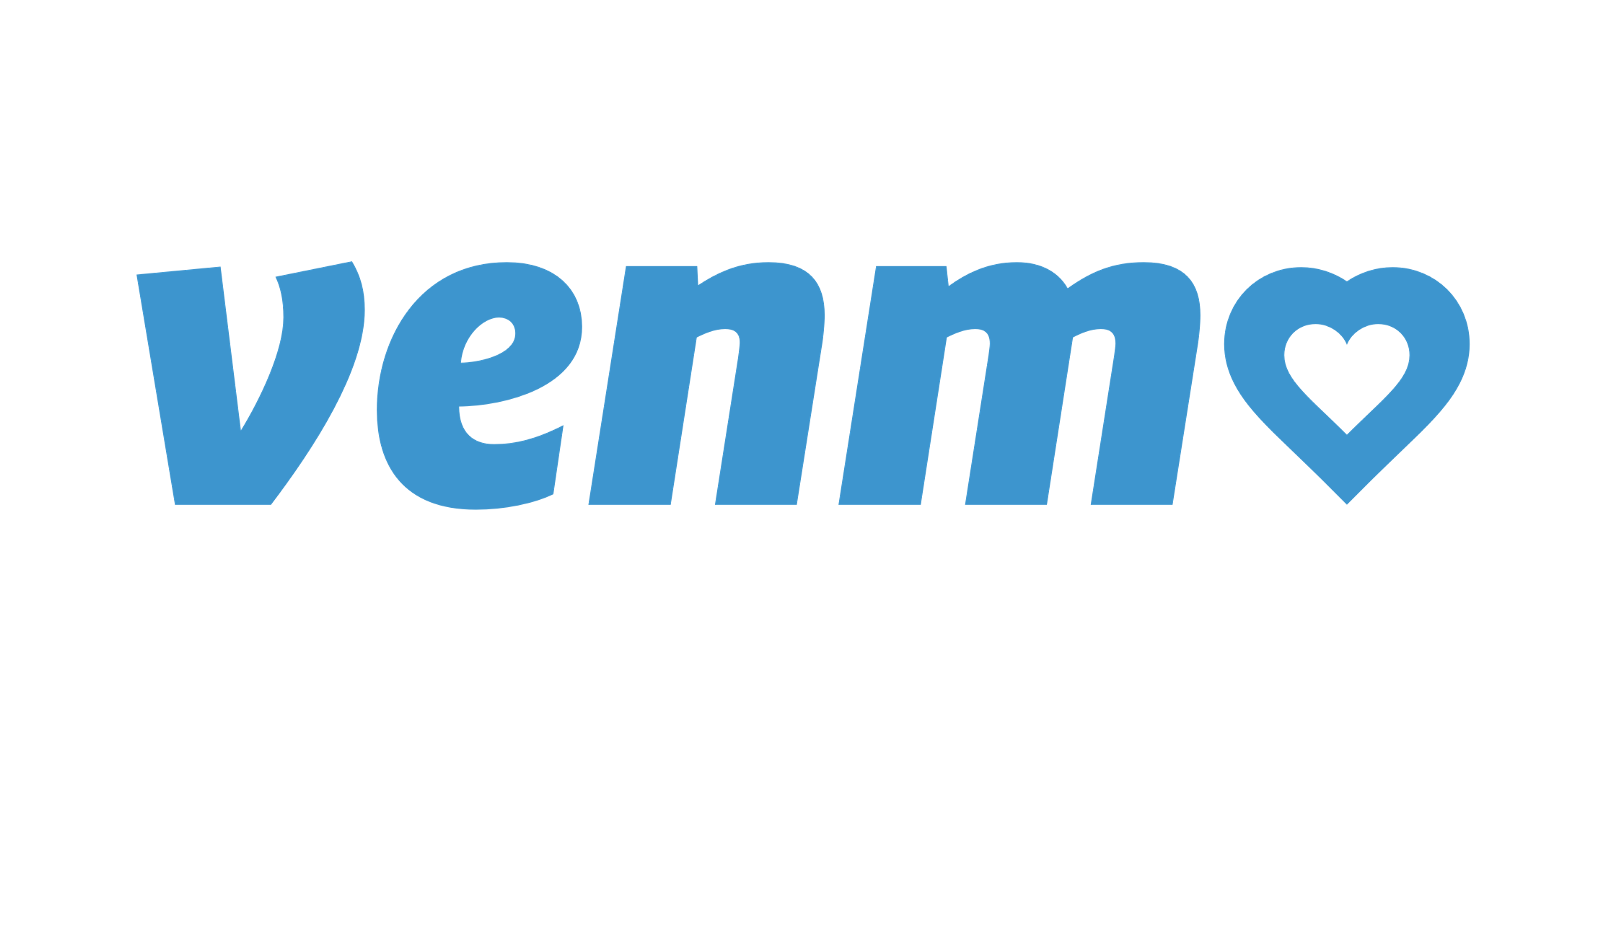 Pay with Venmo Logo - Venmo and Charities